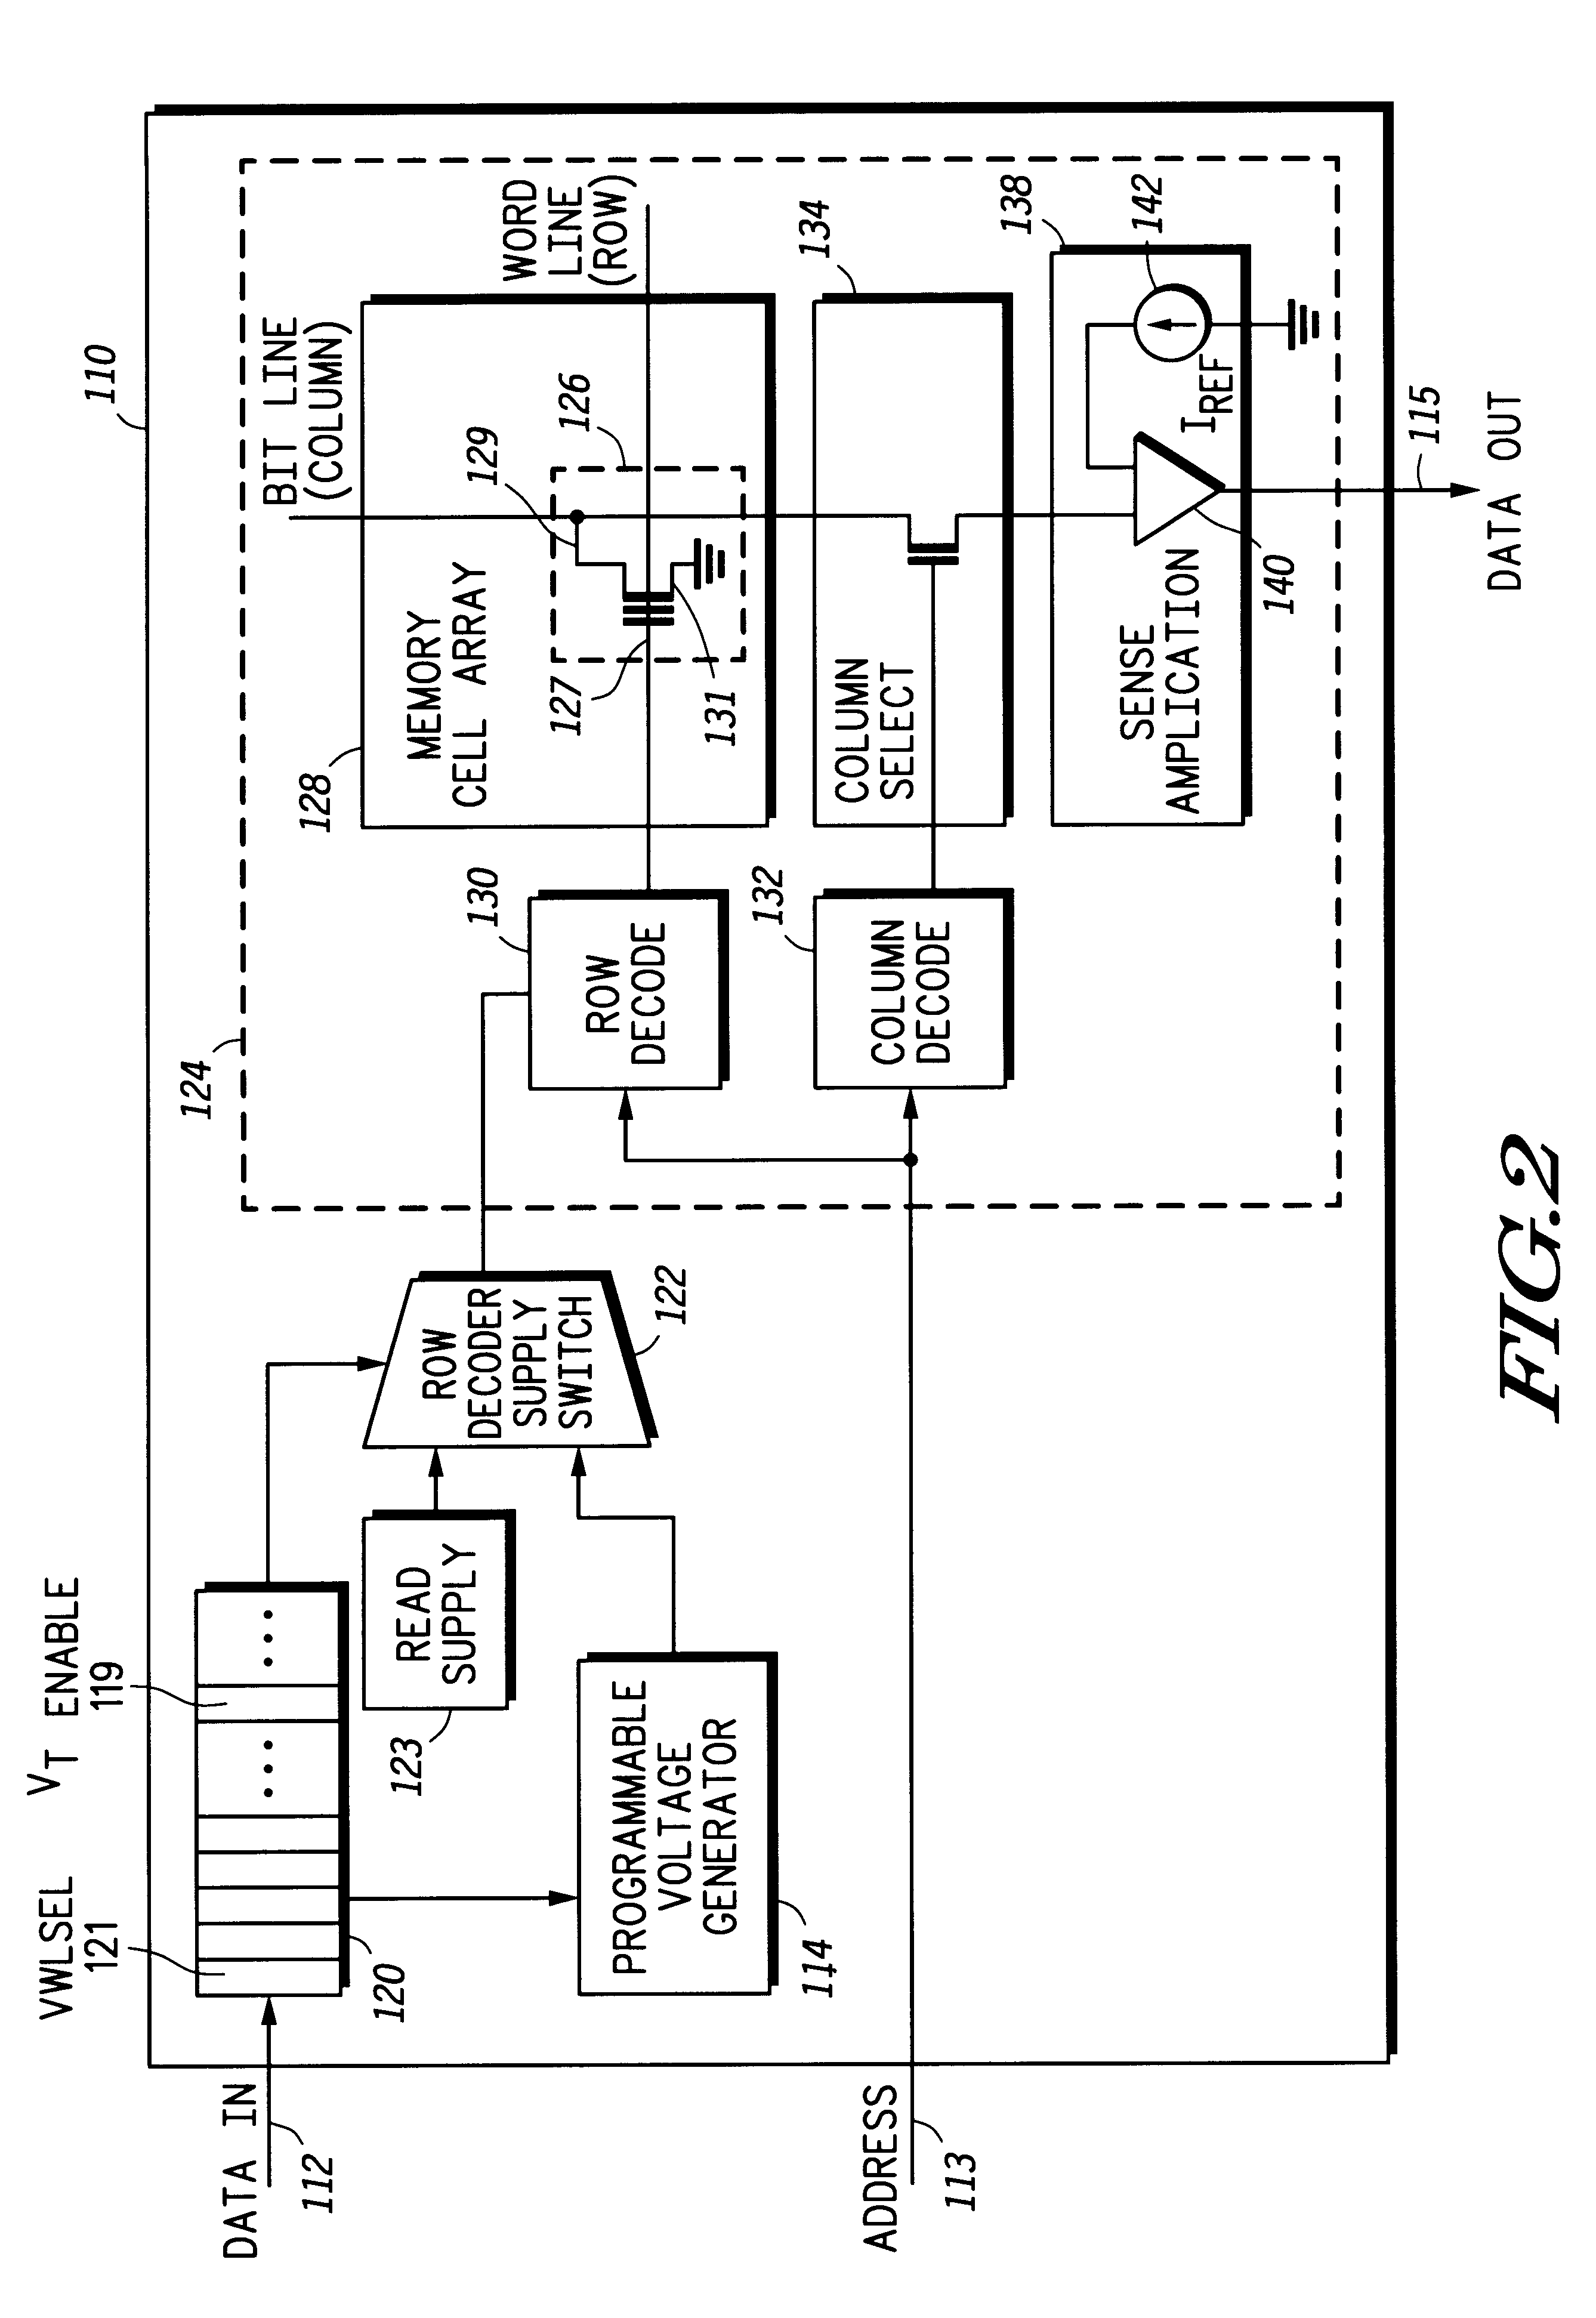 In-circuit memory array bit cell threshold voltage distribution measurement